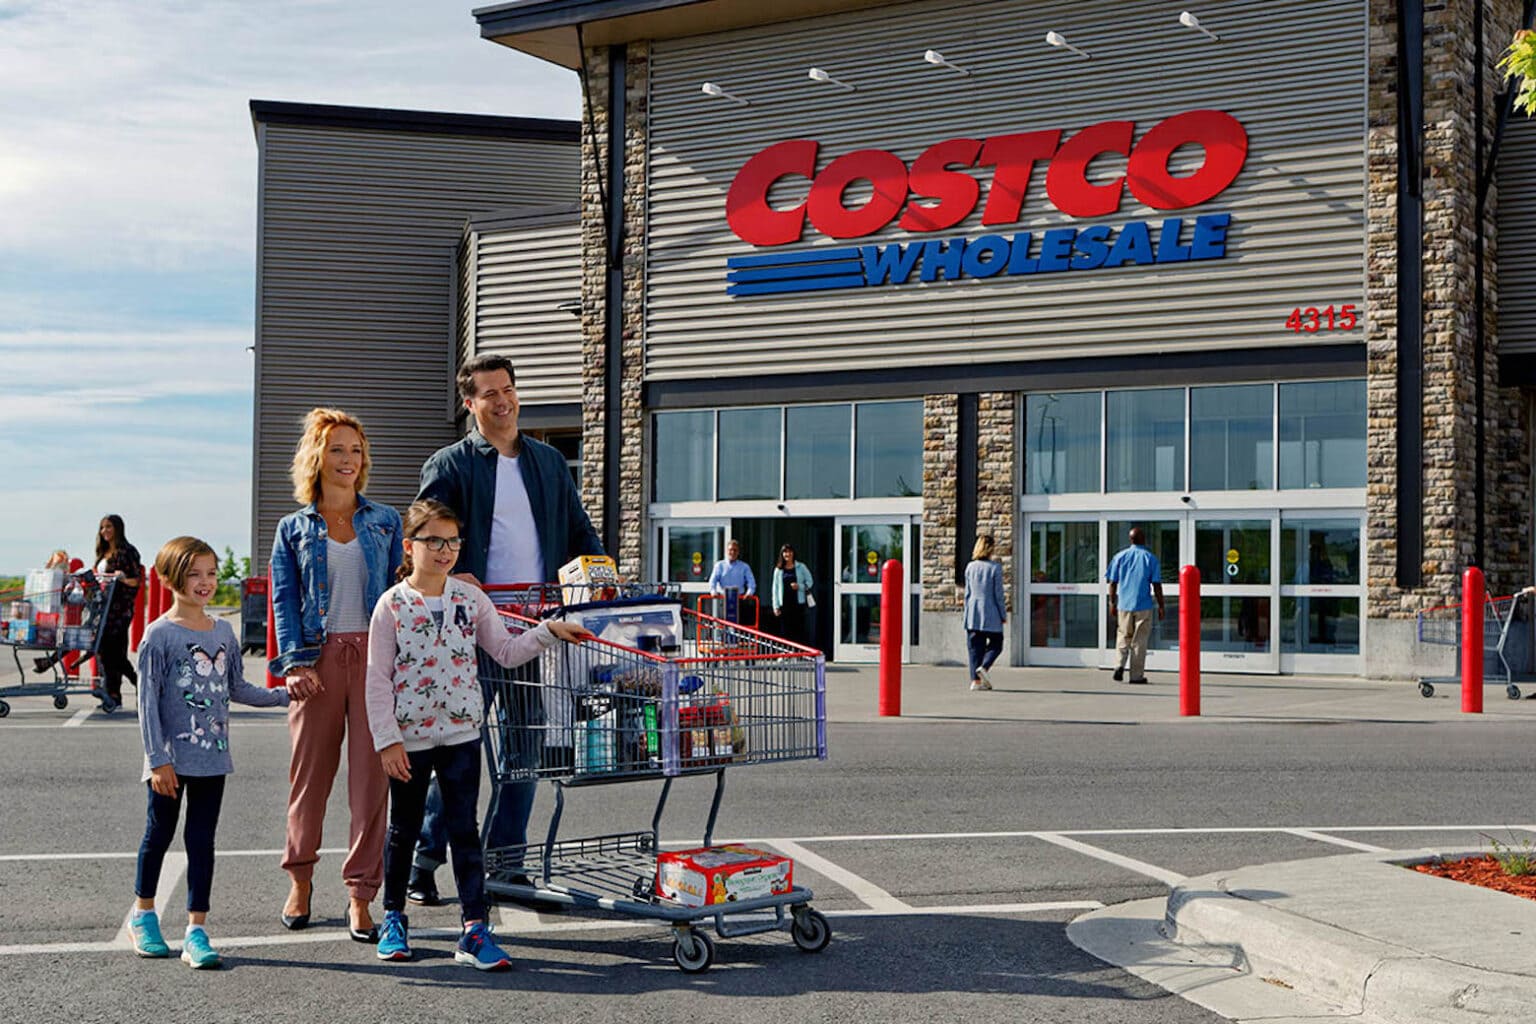 Shop for all your essentials under one roof with a discounted Costco membership.